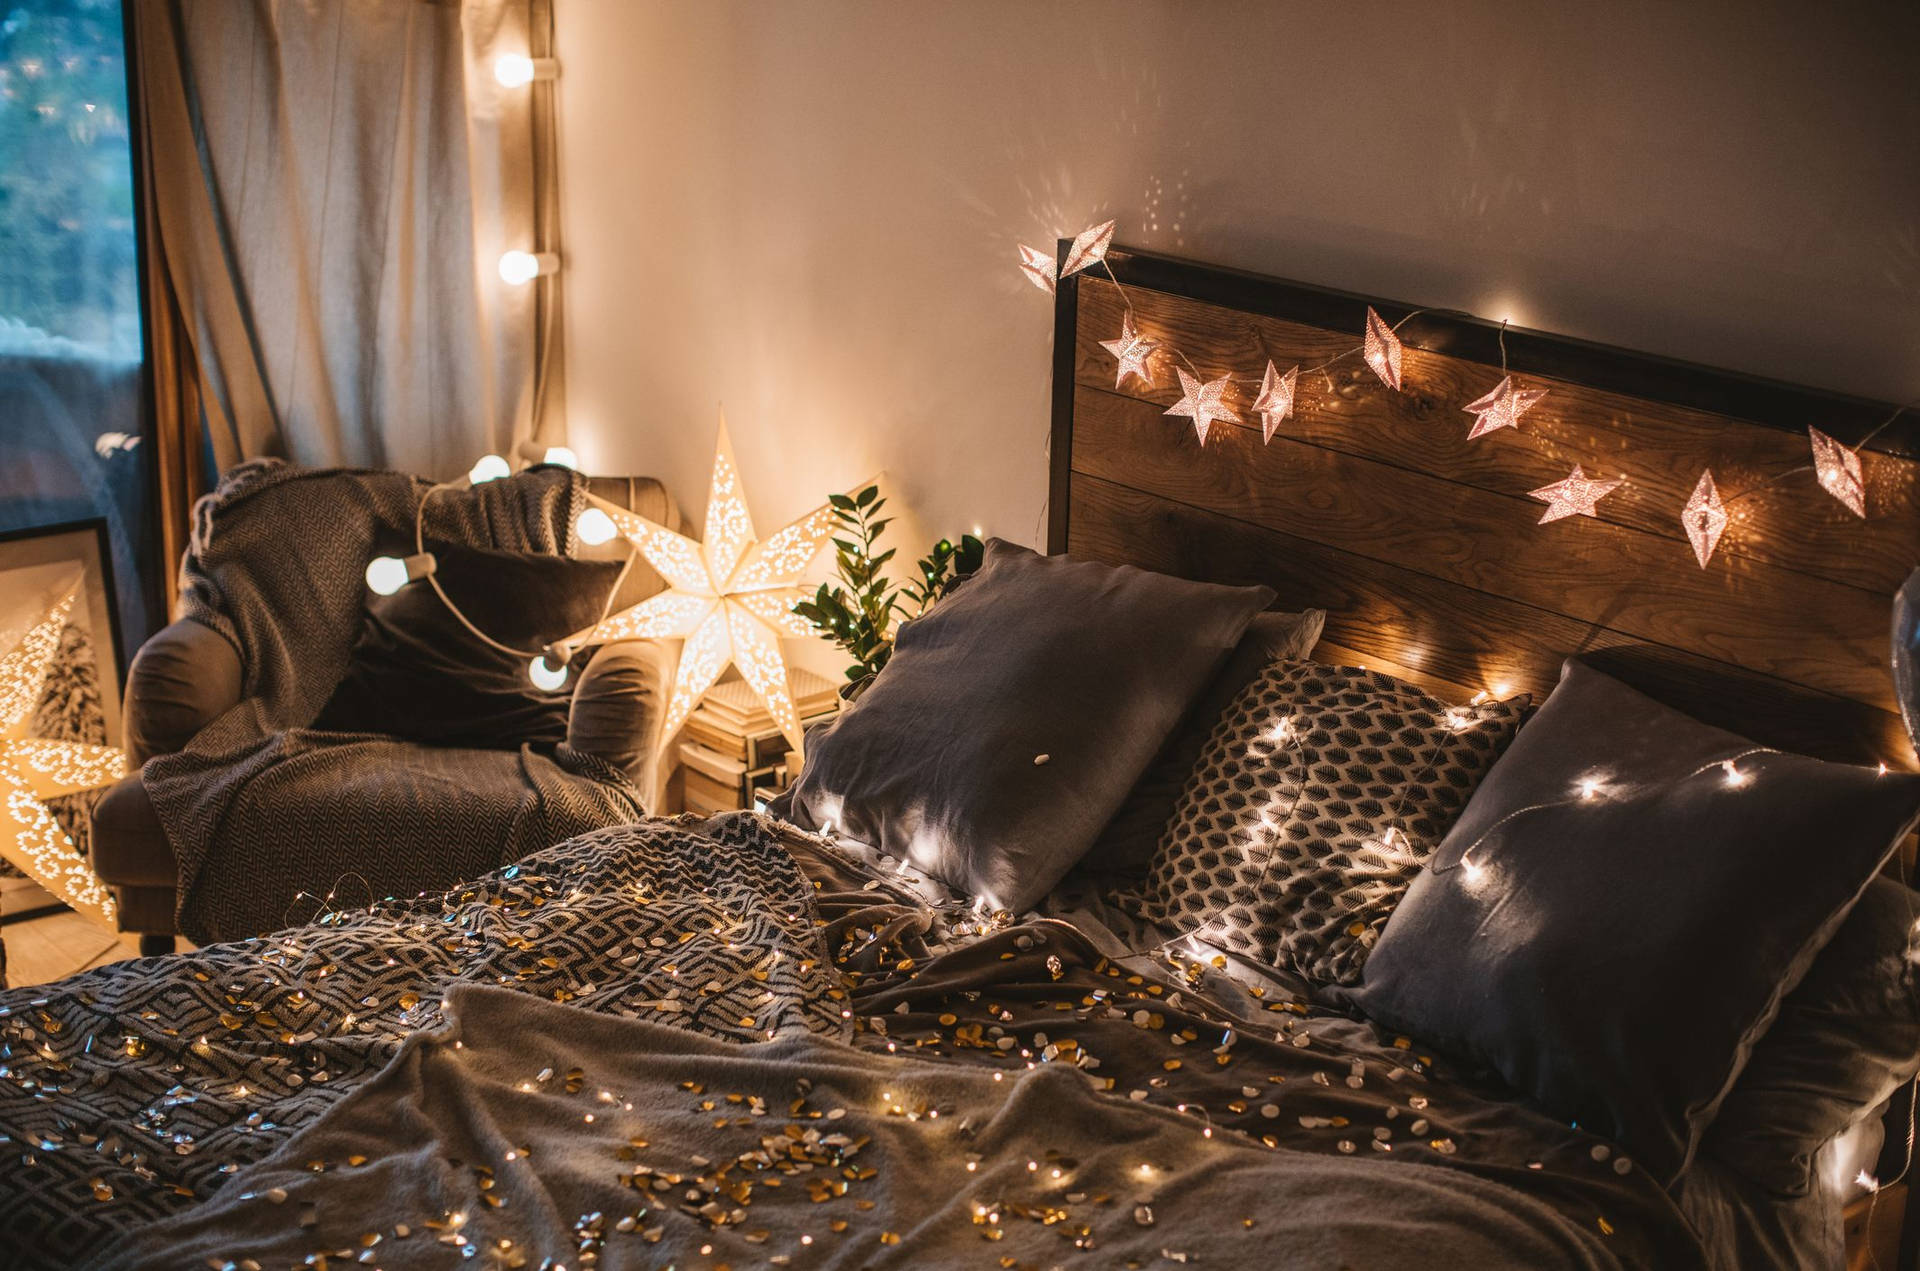 750 Fairy Lights Pictures  Download Free Images on Unsplash